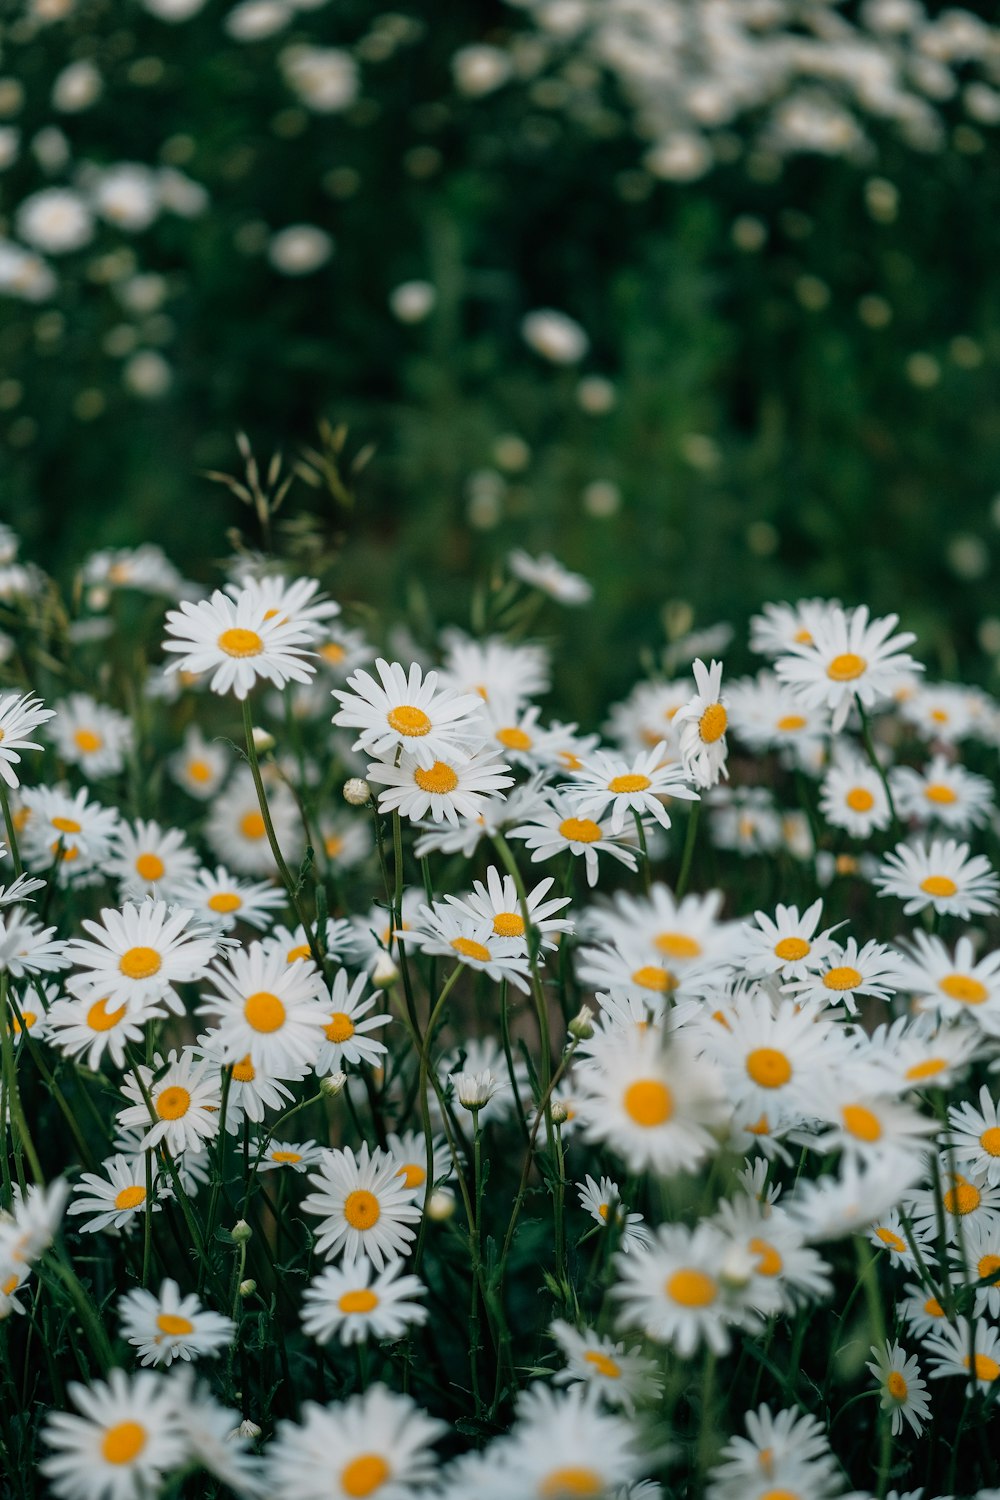 a field of white daisies with yellow centers